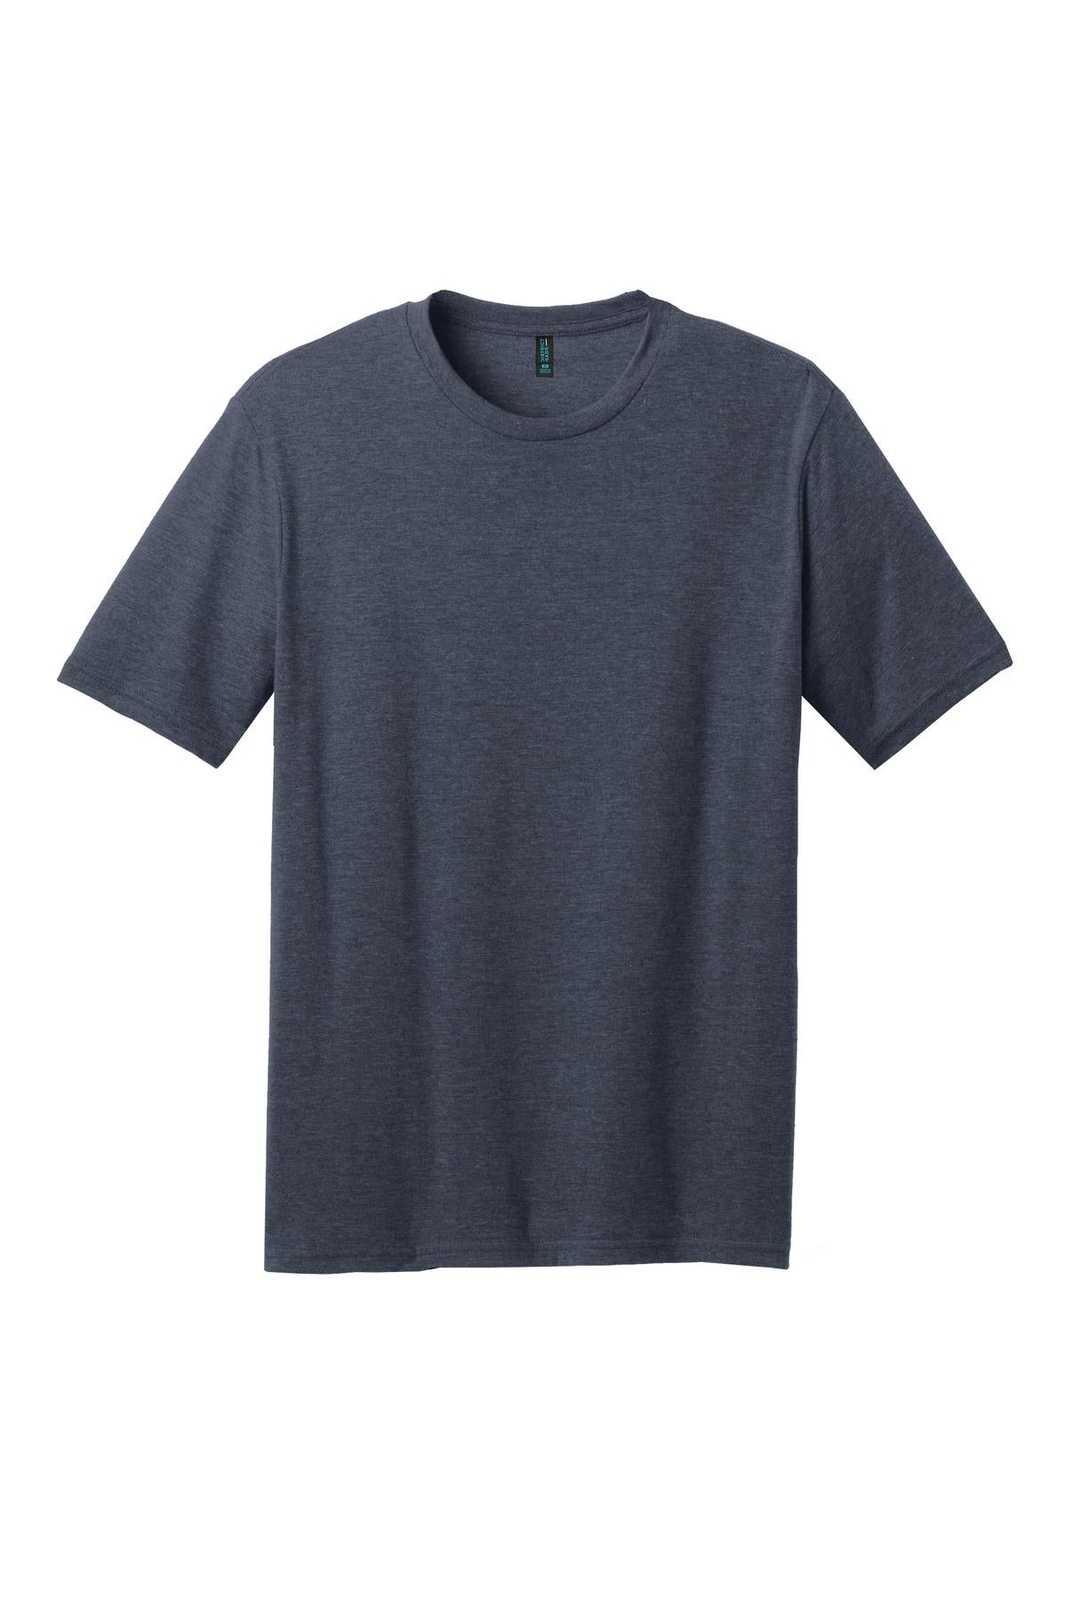 District DM108 Perfect Blend Tee - Heathered Navy - HIT a Double - 5